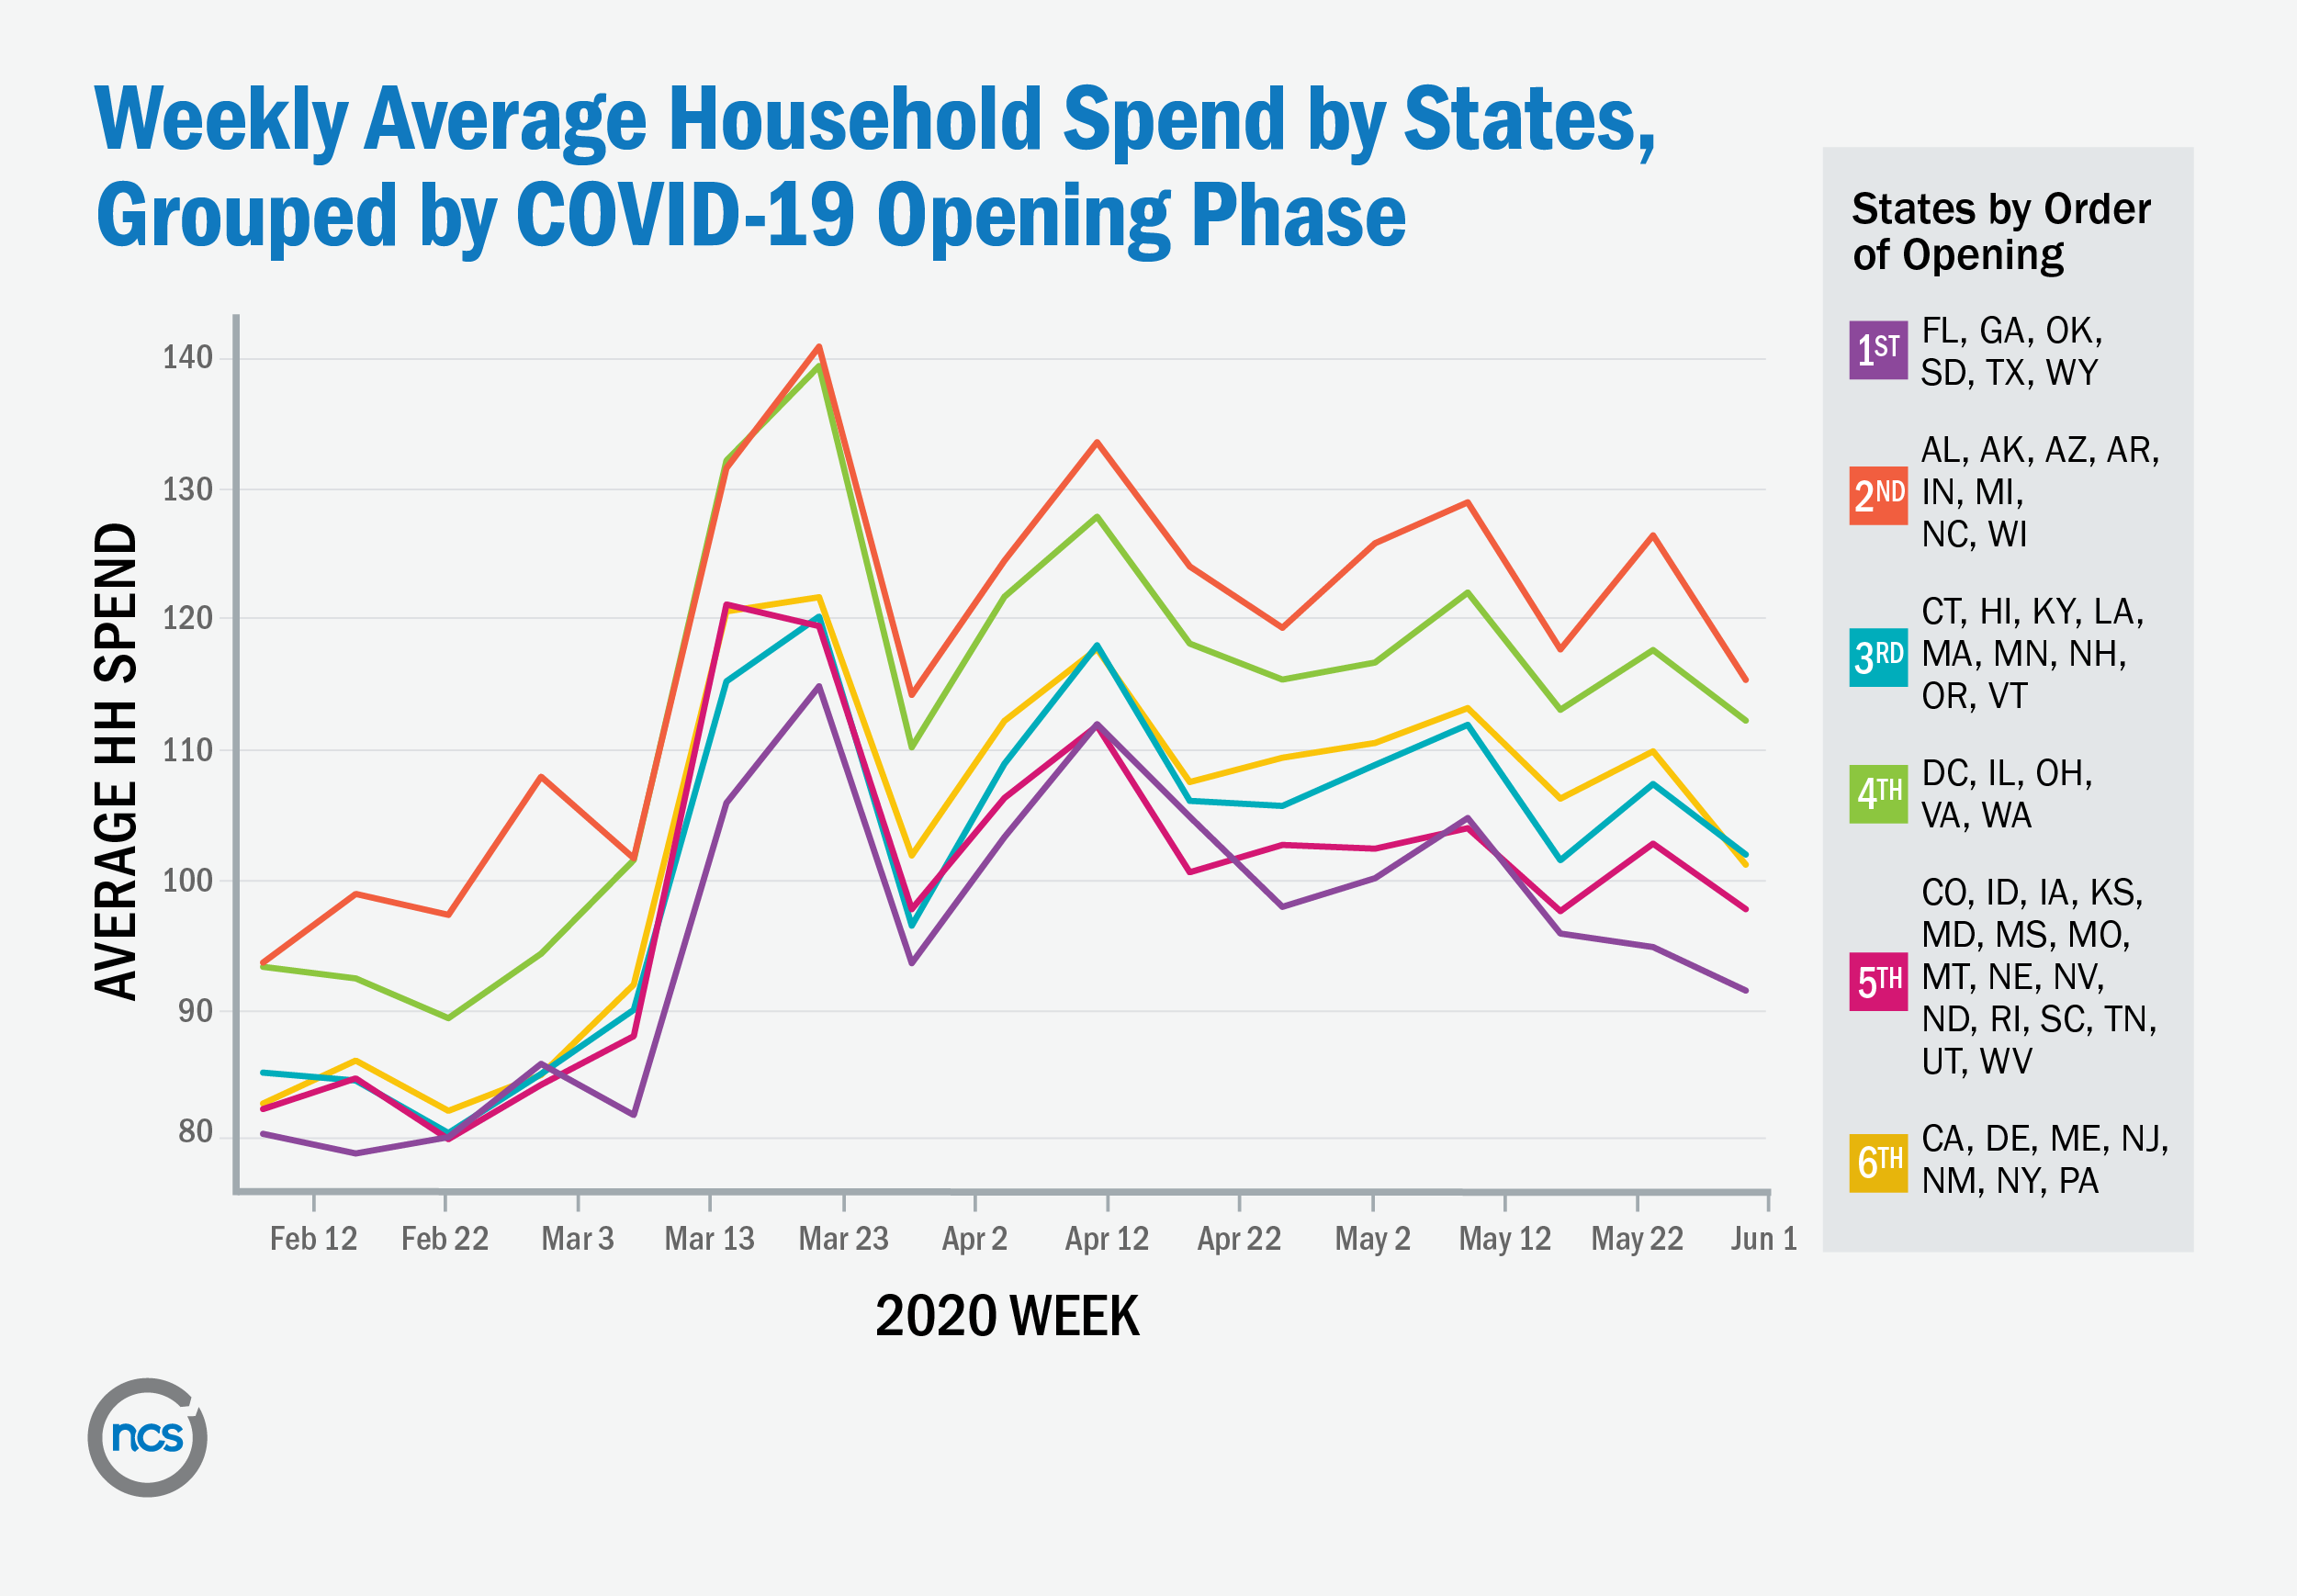 Weekly average household spend by states grouped by COVID-19 opening phase from February to June 2020.